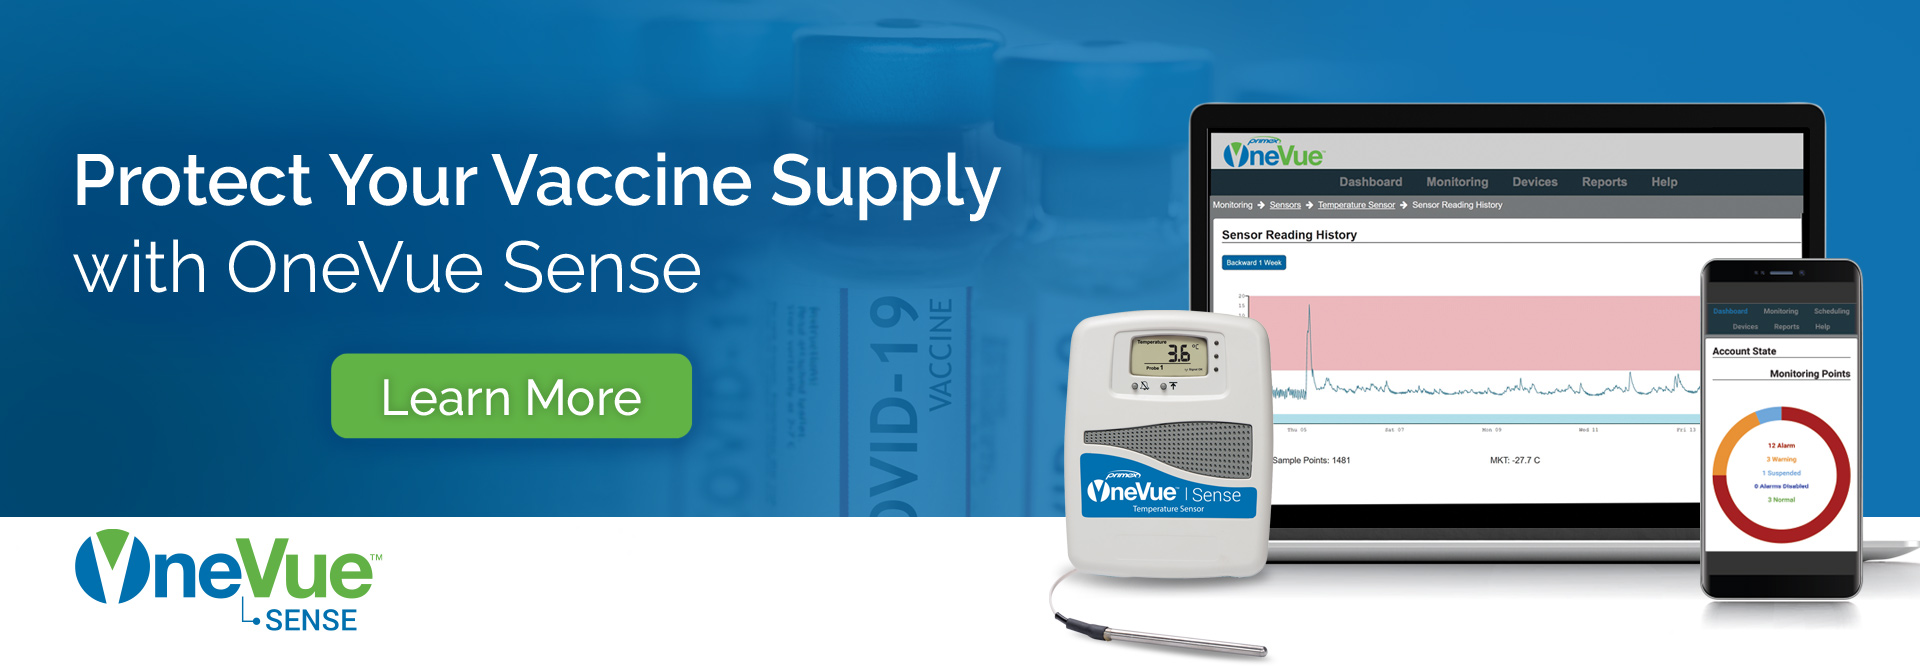 Protect Your Vaccine Supply with OneVue Sense